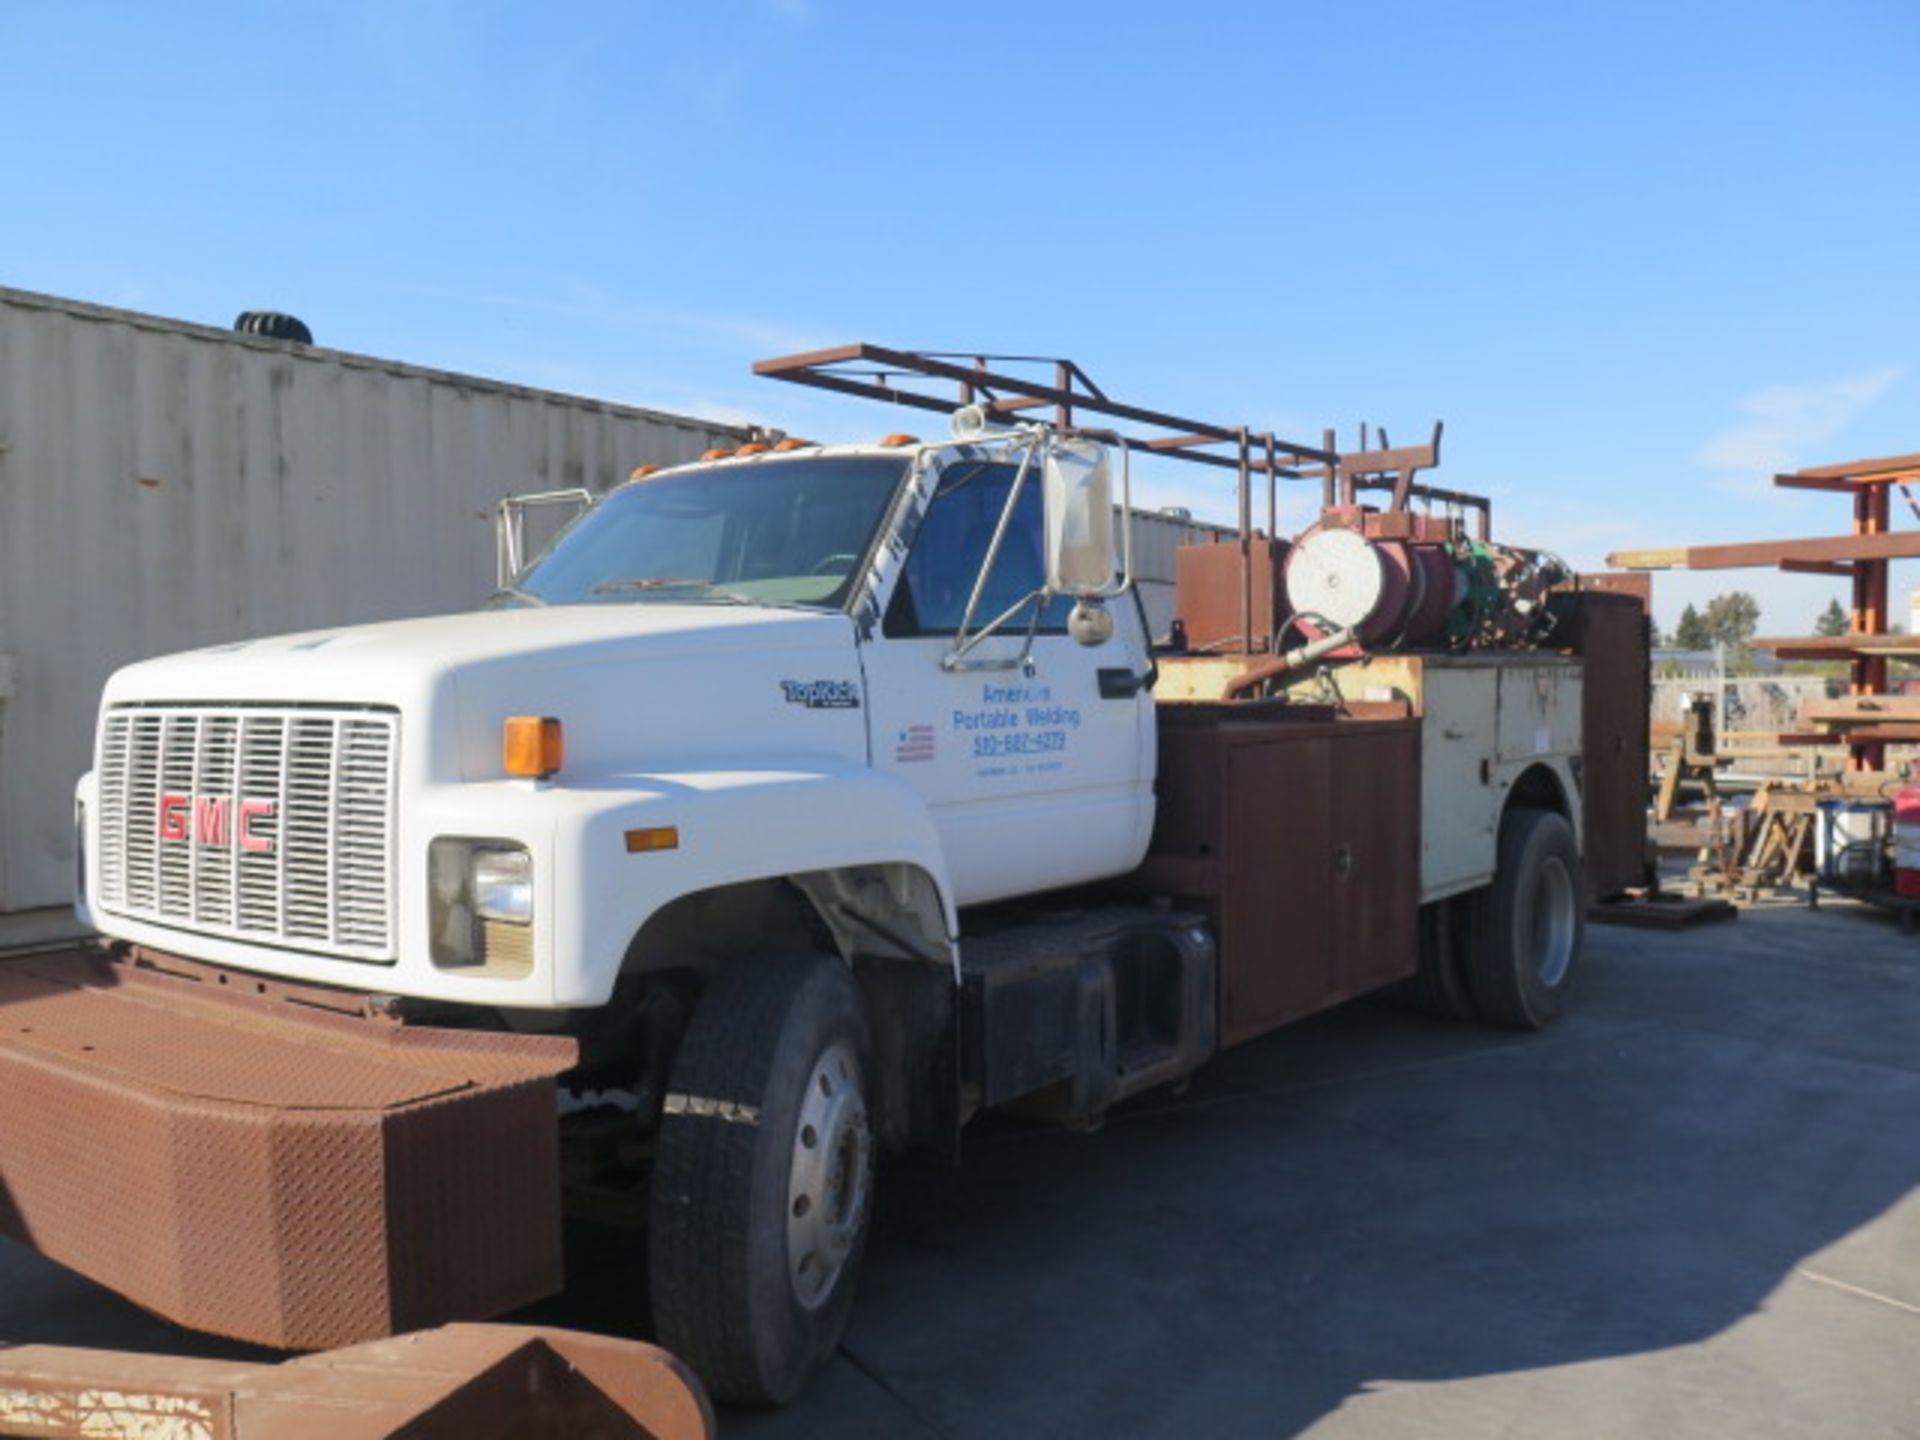 1992 GMC Top Kick Service Truck Lisc# 4J61885 w/ Caterpillar Diesel Engine, Automatic, SOLD AS IS